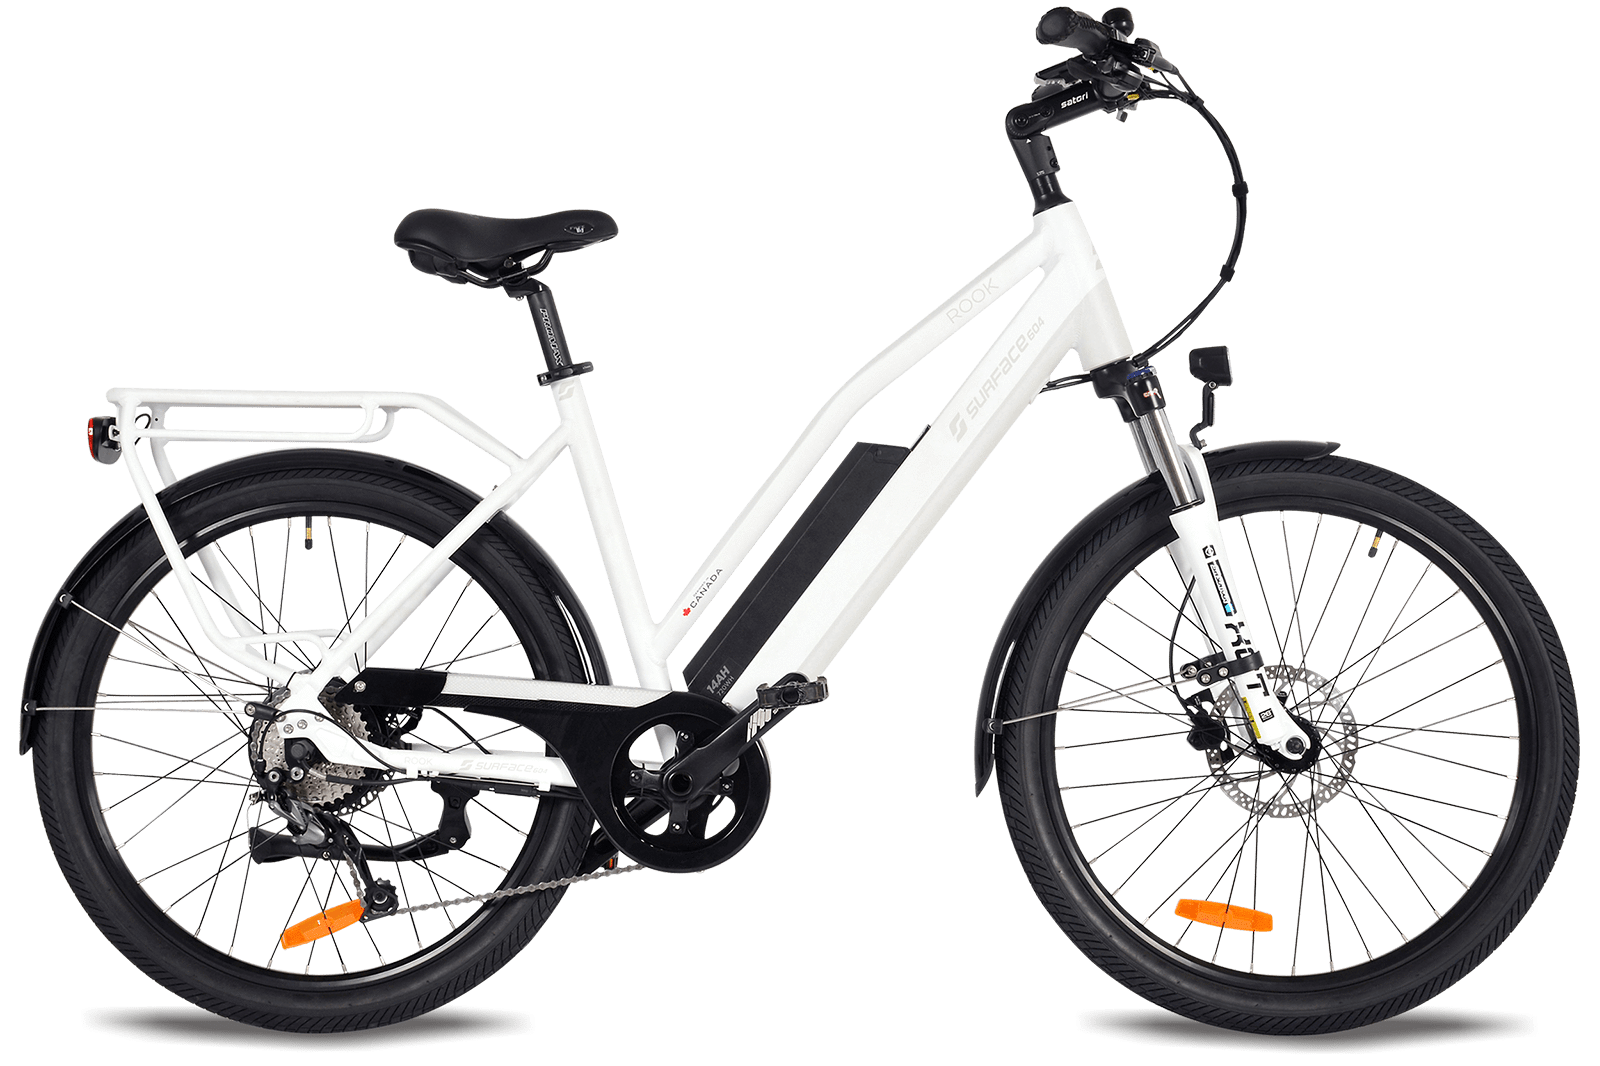 Surface604 eBikes at eBike Central